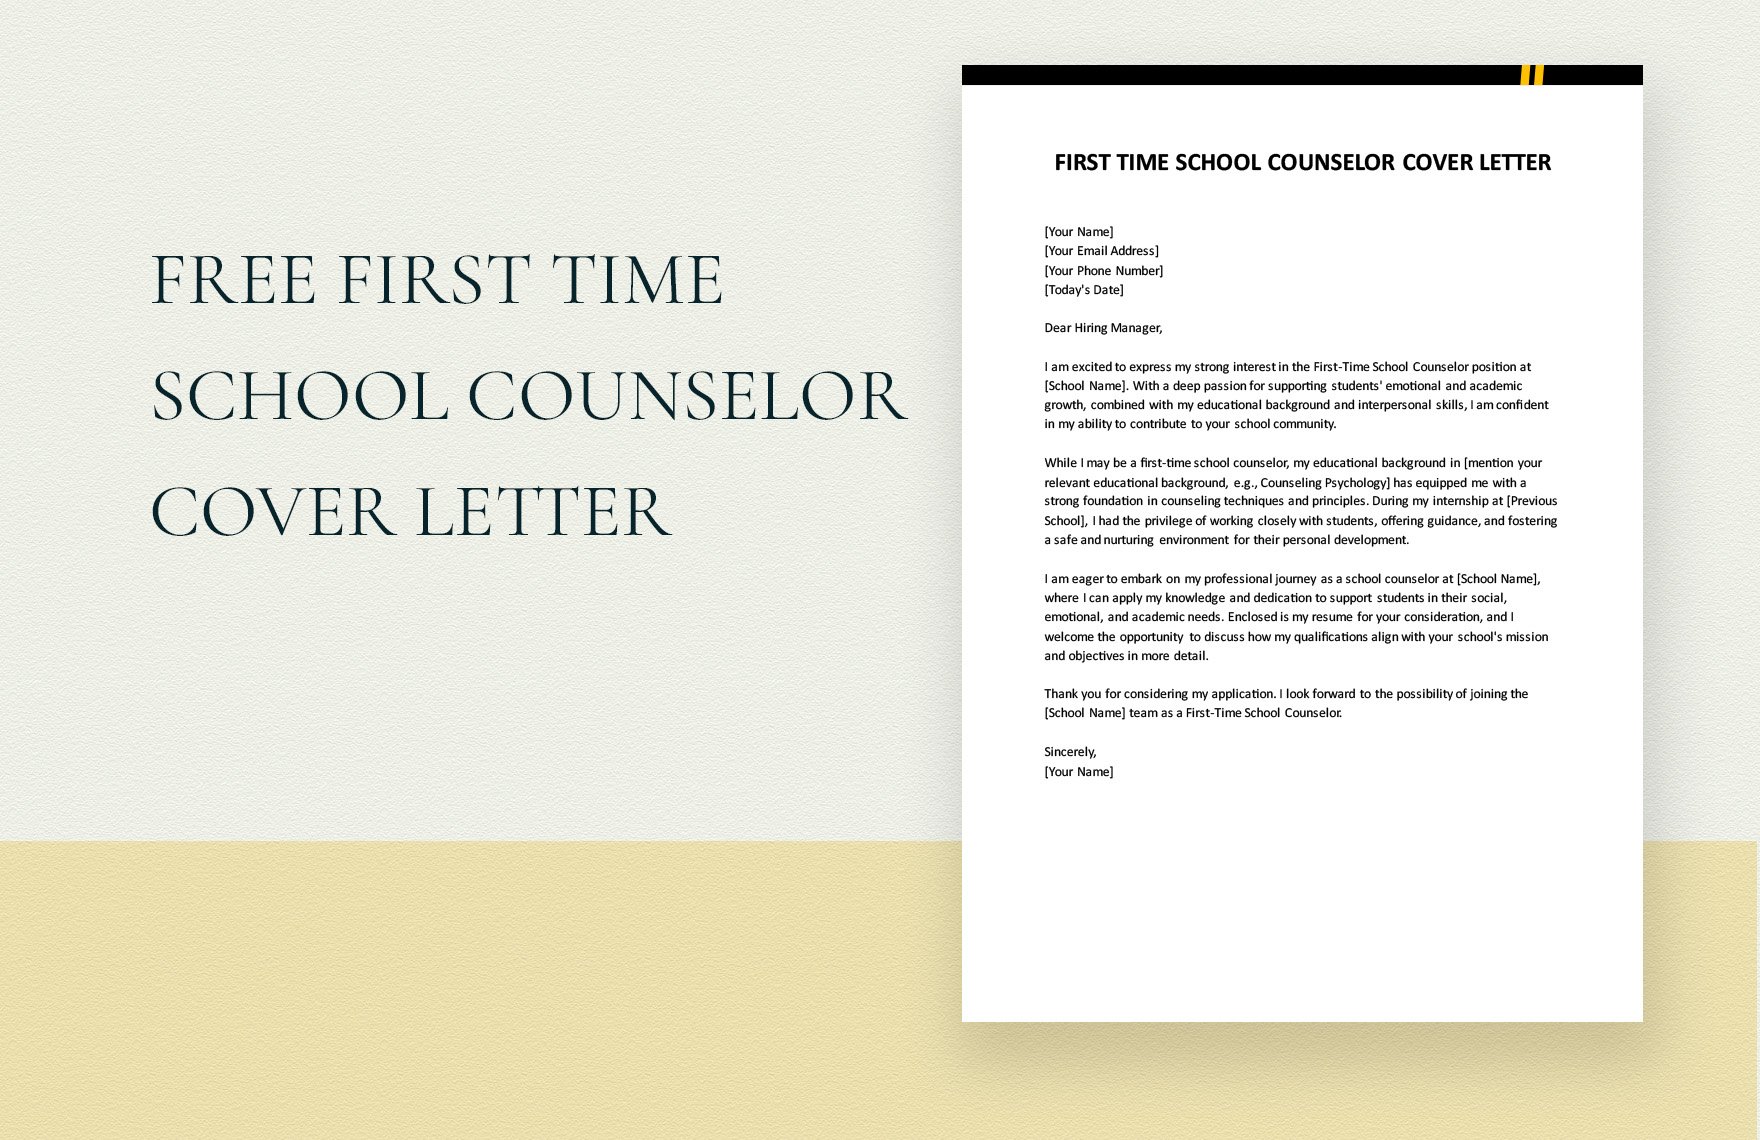 First Time School Counselor Cover Letter in Word, Google Docs, PDF